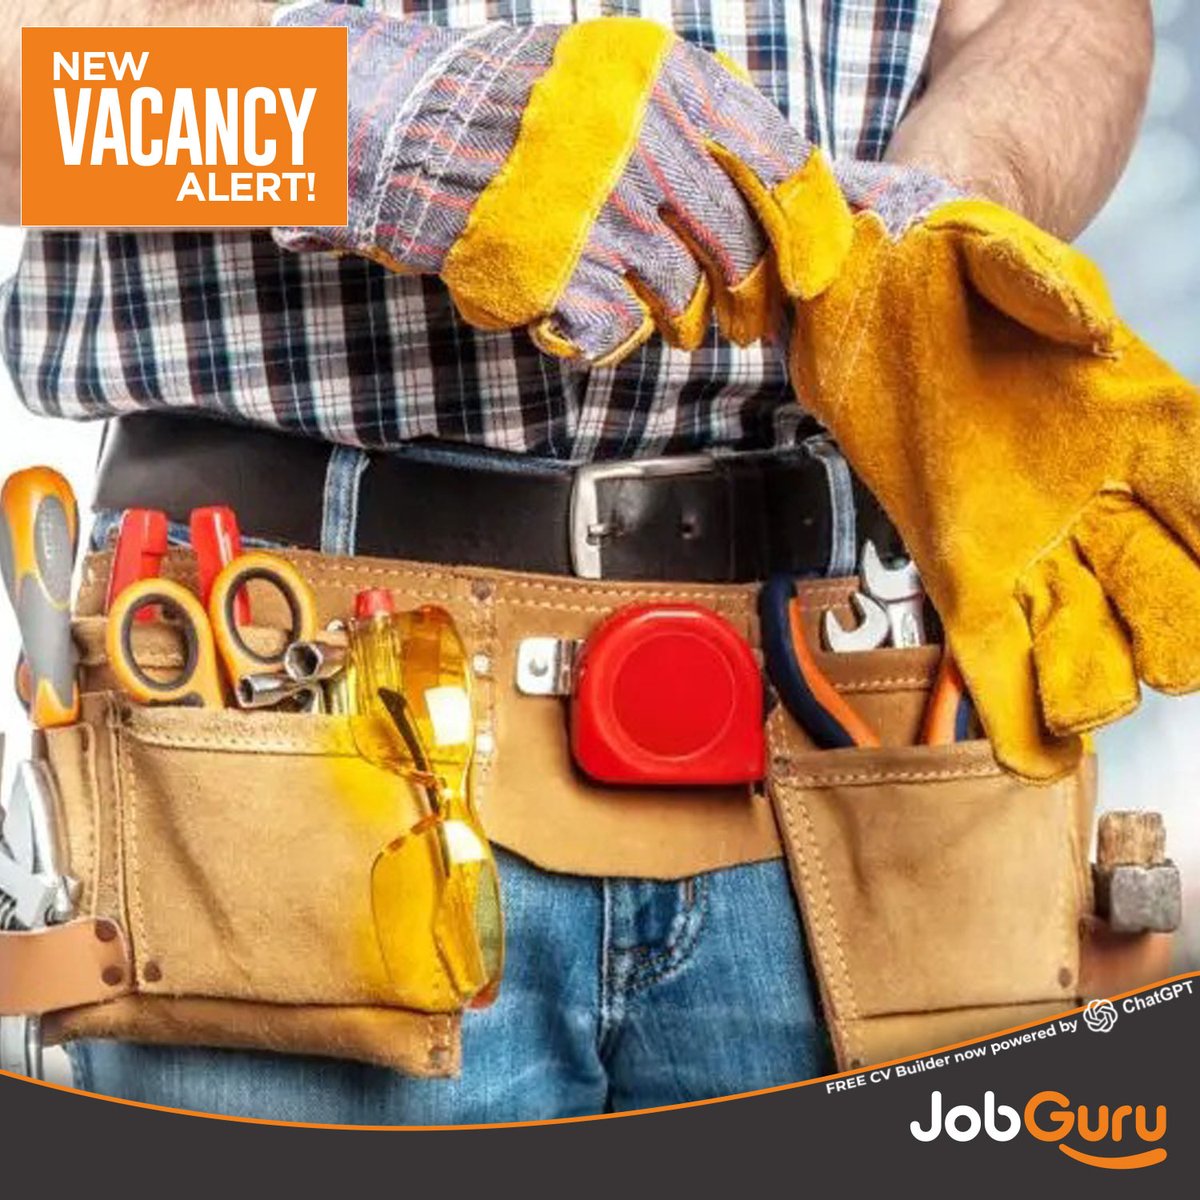 🔧 Sodexo is hiring a Handy Person in Dungarvan, Co. Waterford. If you're skilled with tools, problem-solving, and want to be part of a supportive team, apply now! Great benefits included. #JobOpportunity #HandyPerson #Dungarvan #Sodexo 🛠️jobguru.ie/vacancy/handyp…